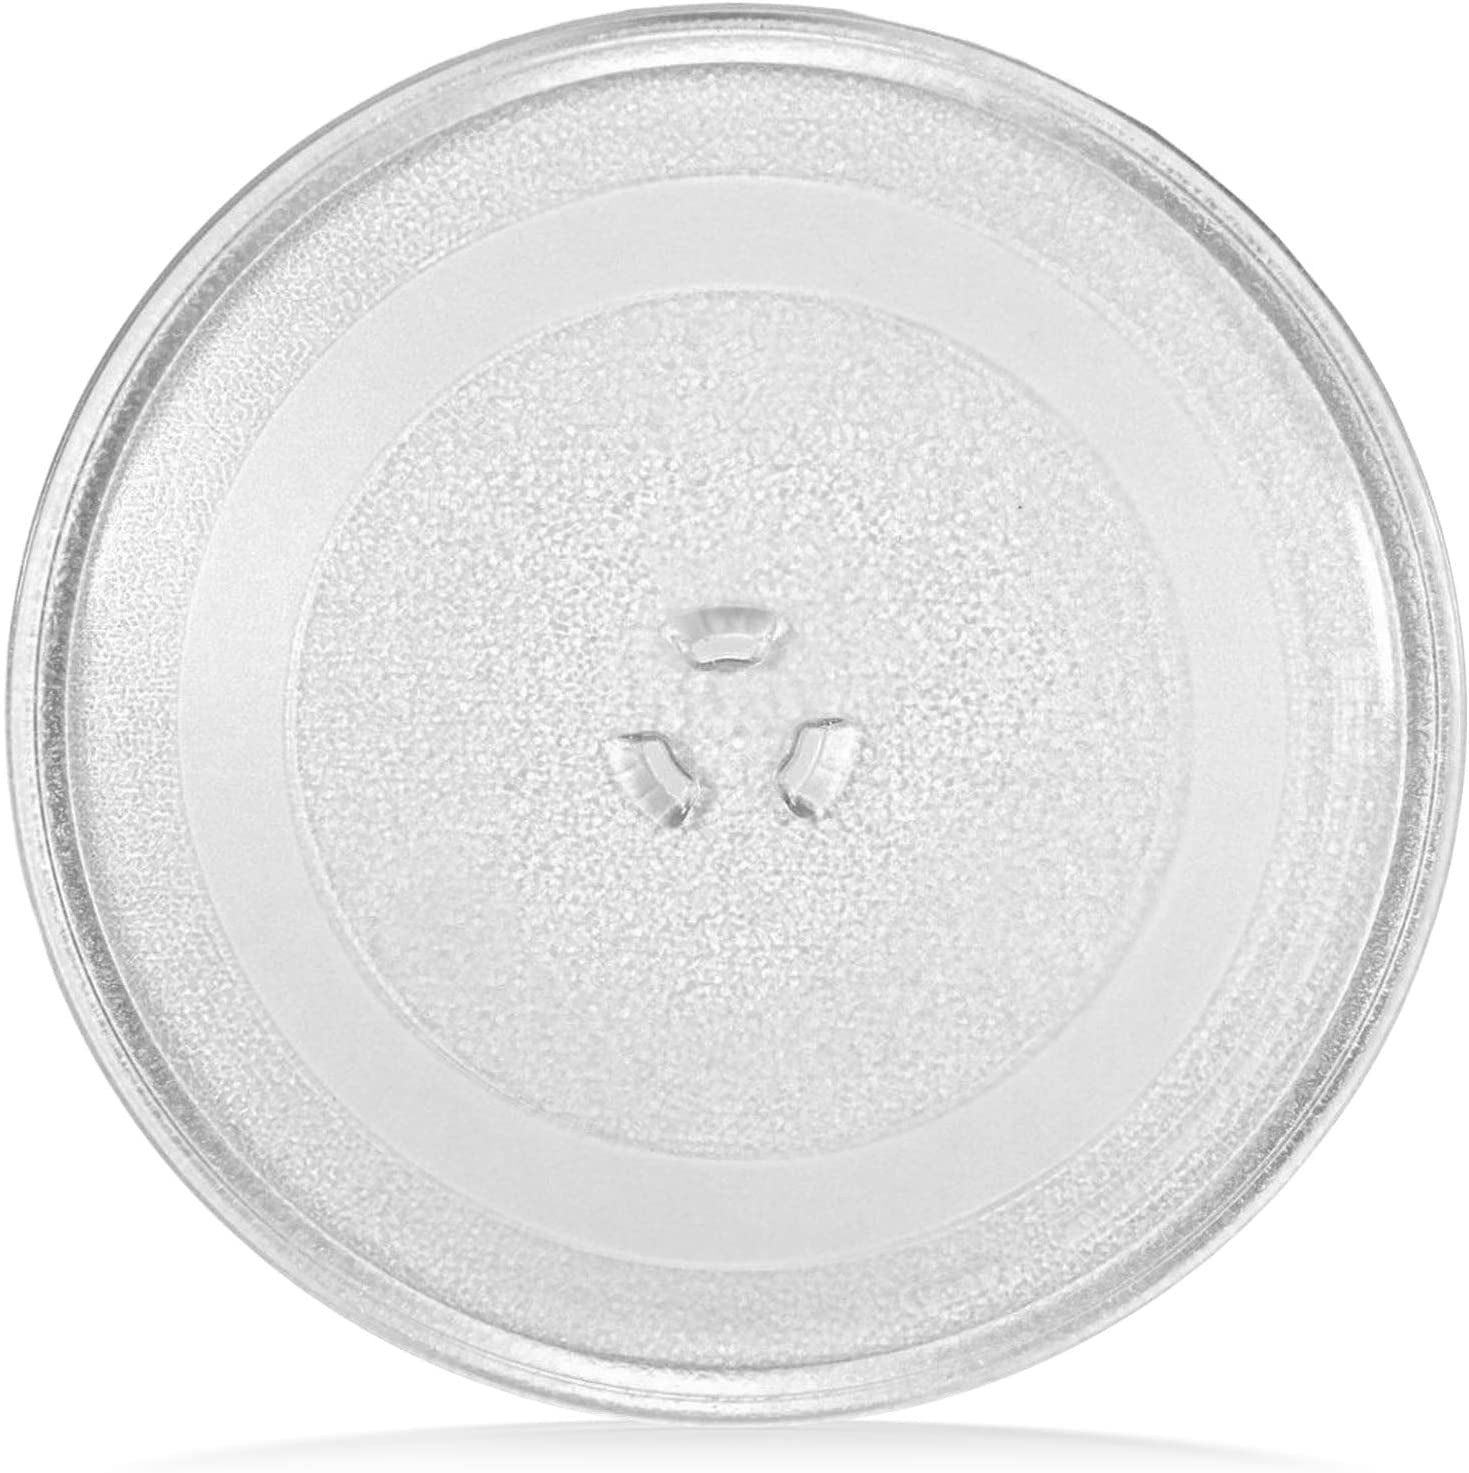 12.75" Sears, Kenmore and LG -Compatible Microwave Glass Plate/Microwave Glass Turntable Plate Replacement - 12 3/4" Plate, Equivalent to 1B71961E, 1B71961F and 507049